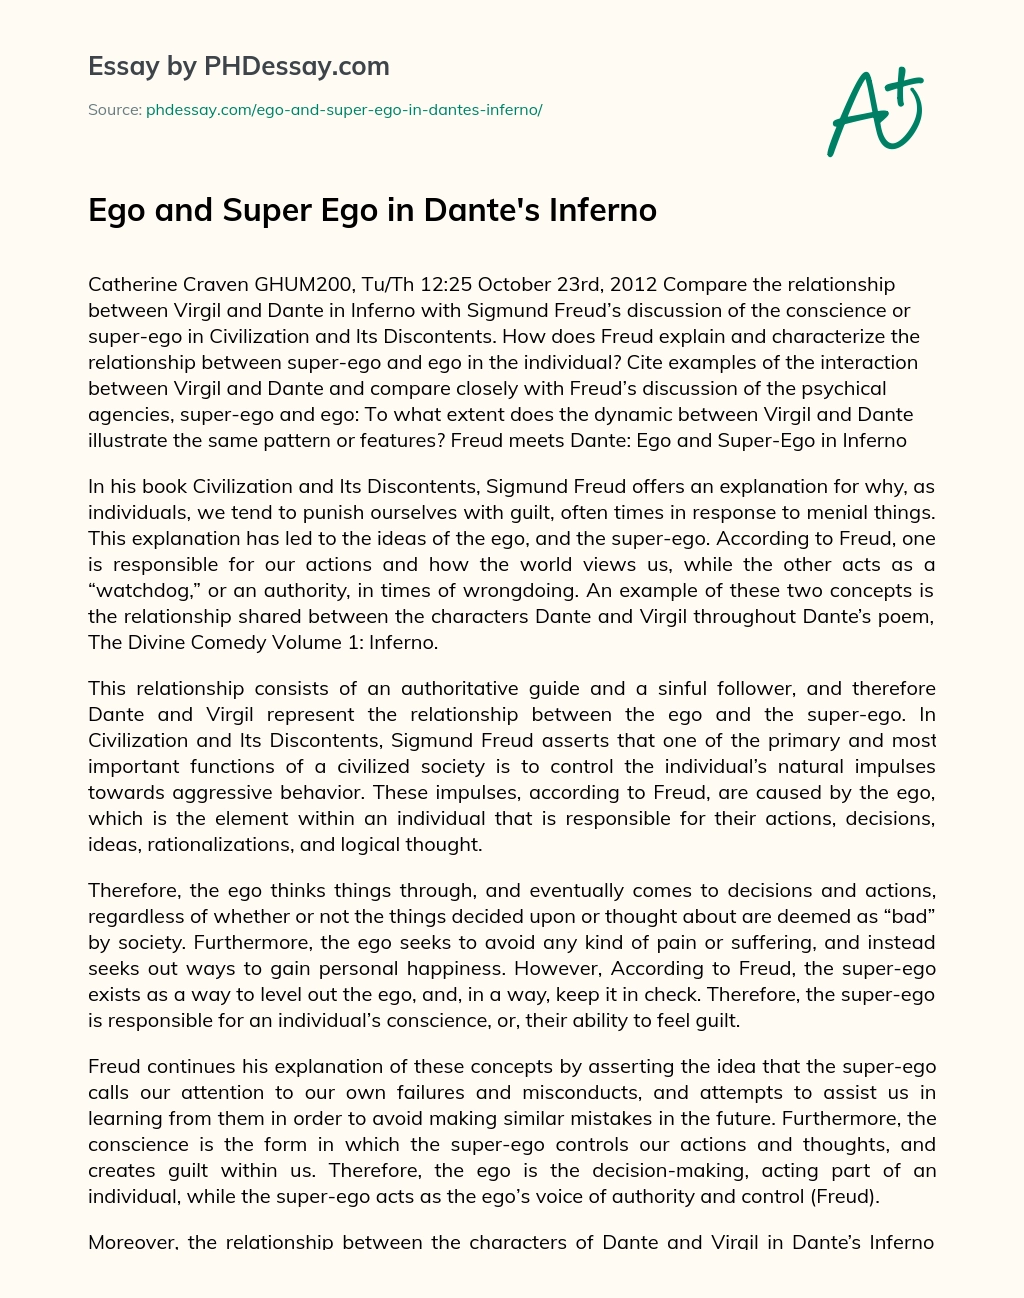 Ego and Super Ego in Dante’s Inferno essay